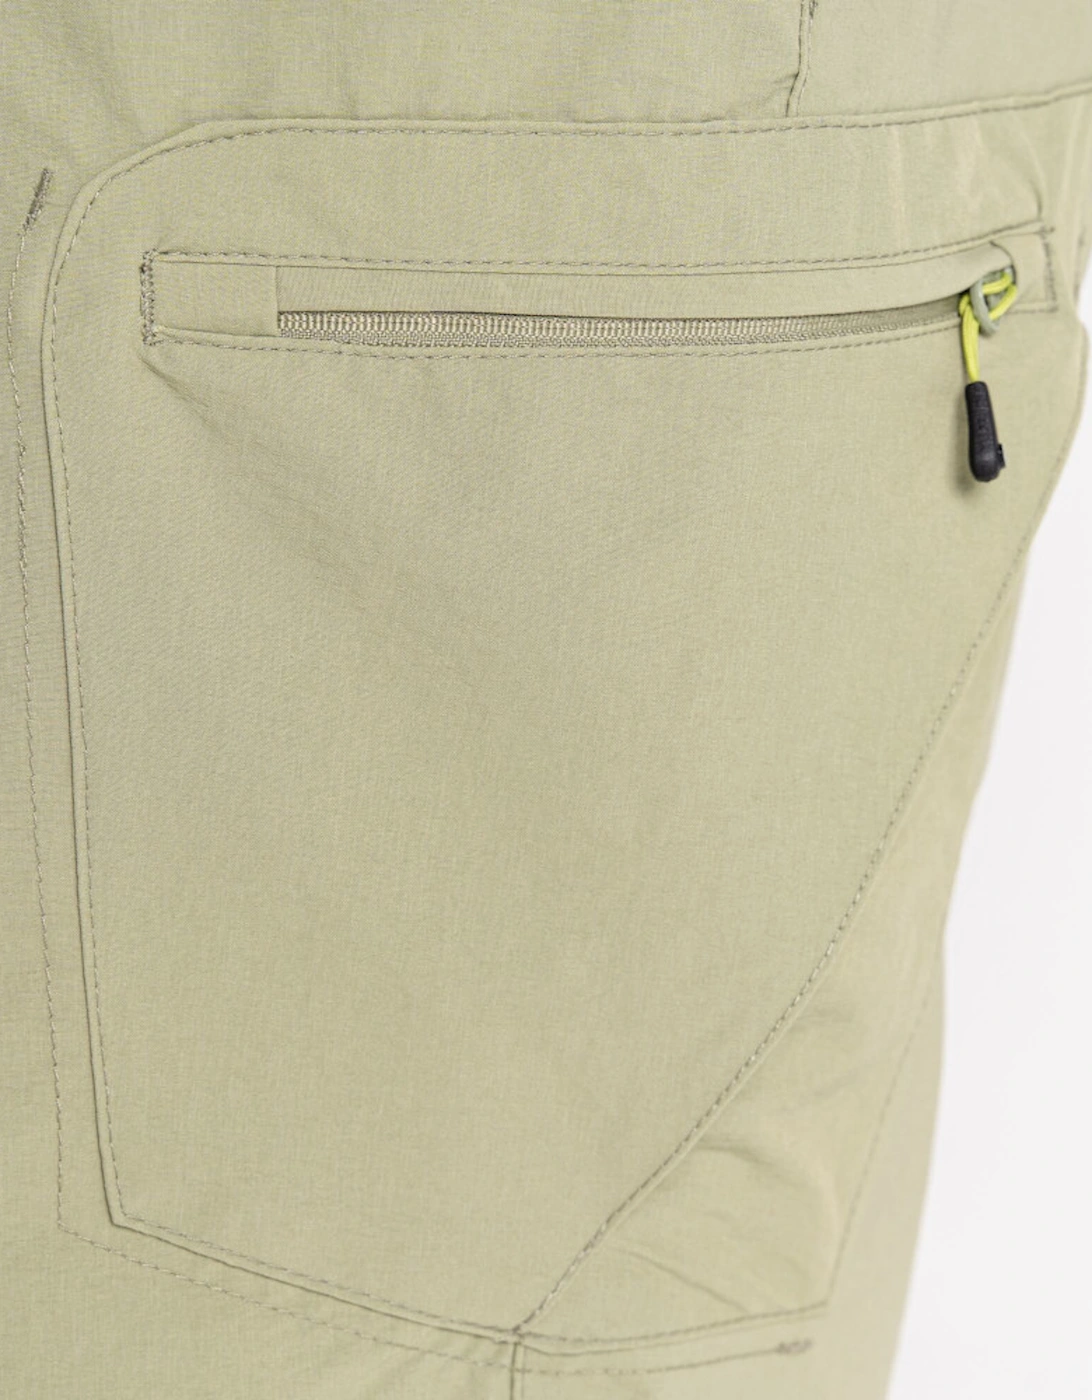 Mens Tuned In II Water Repellent Multi Pocket Shorts